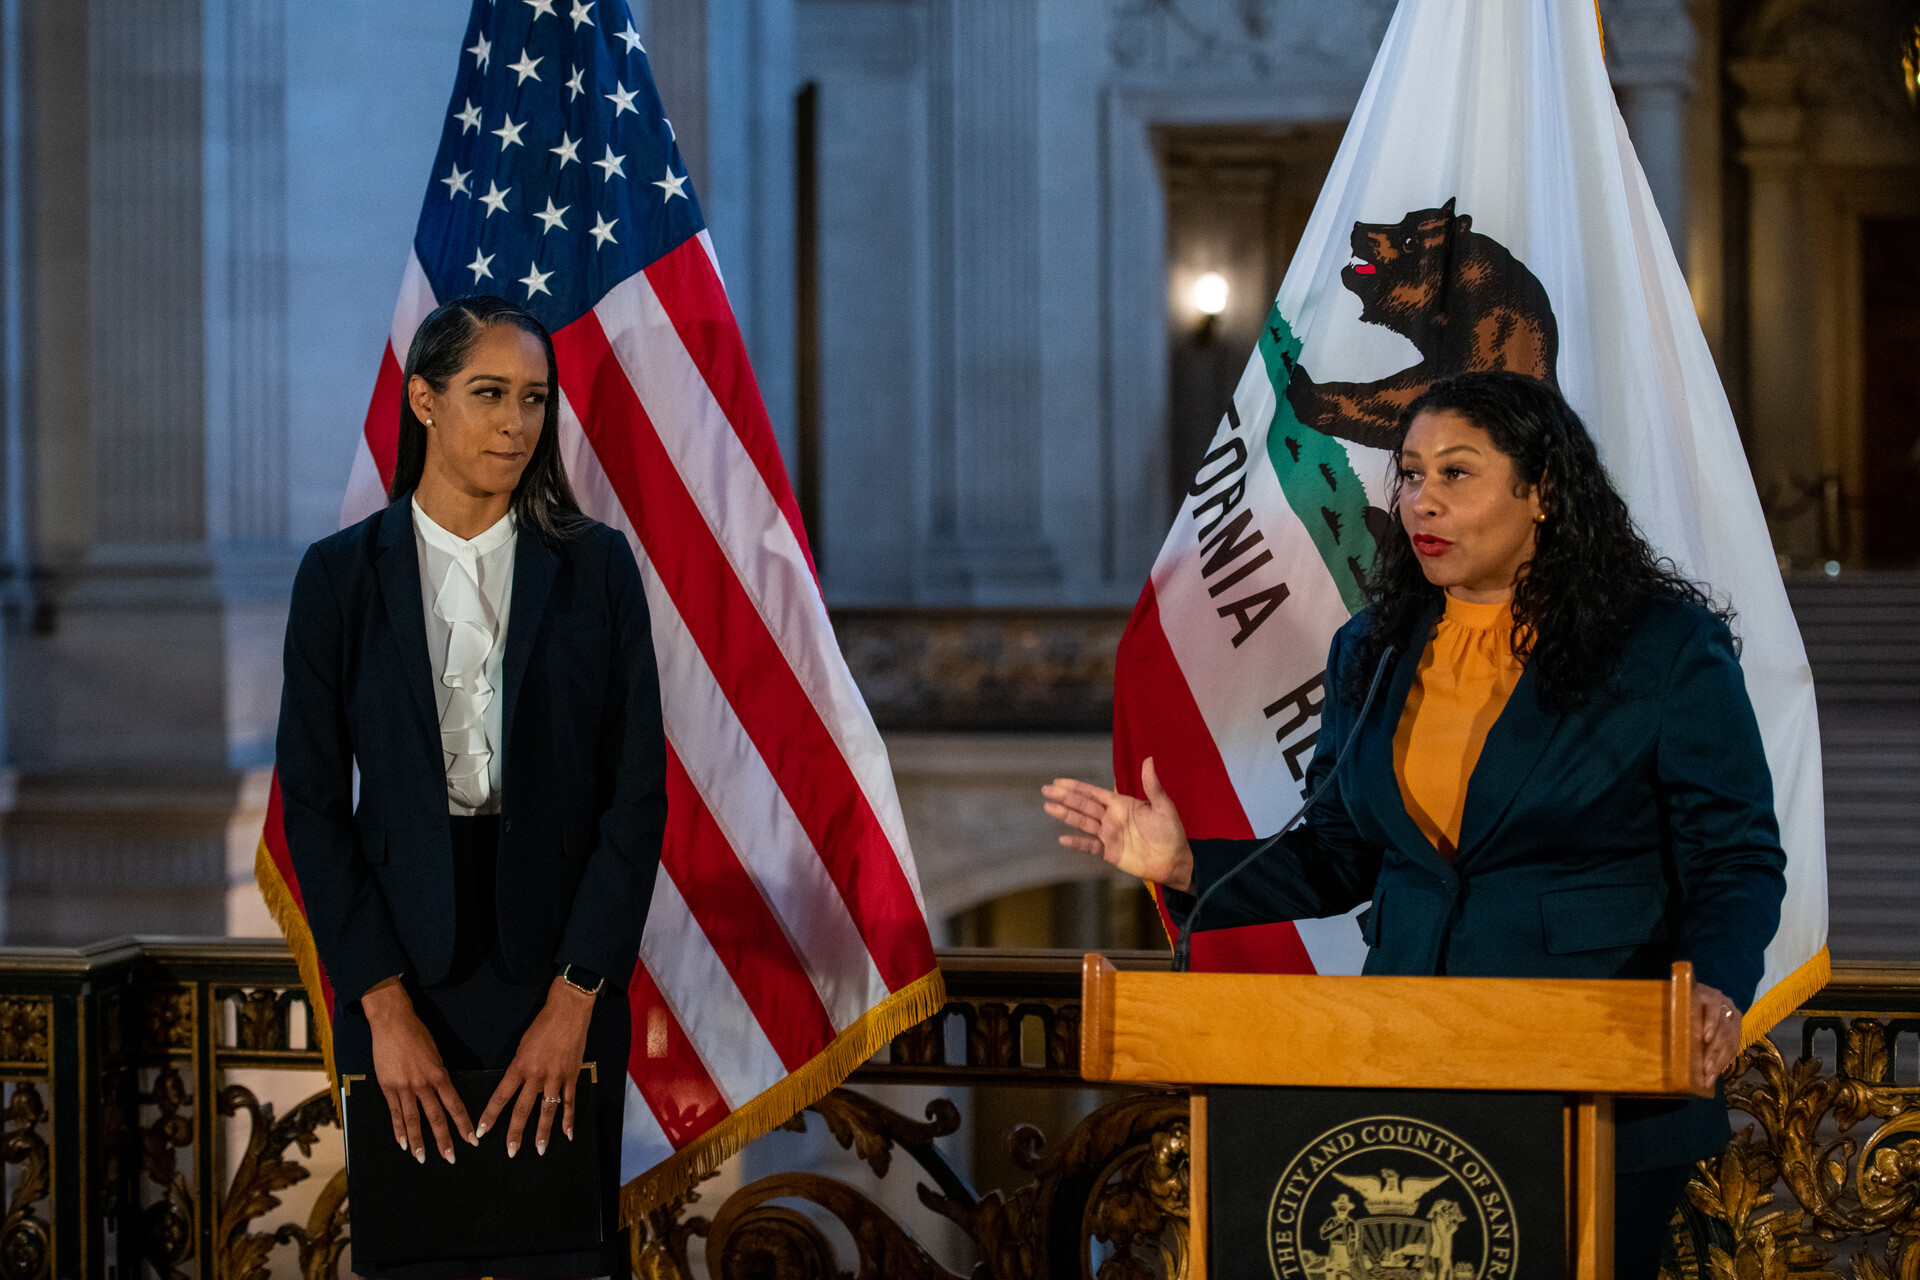 Mayor London Breed stands at a podium, her right hand extended, with a California and American flag behind her, introducing Brooke Jenkins - standing to her right - as San Francisco's new district attorney.